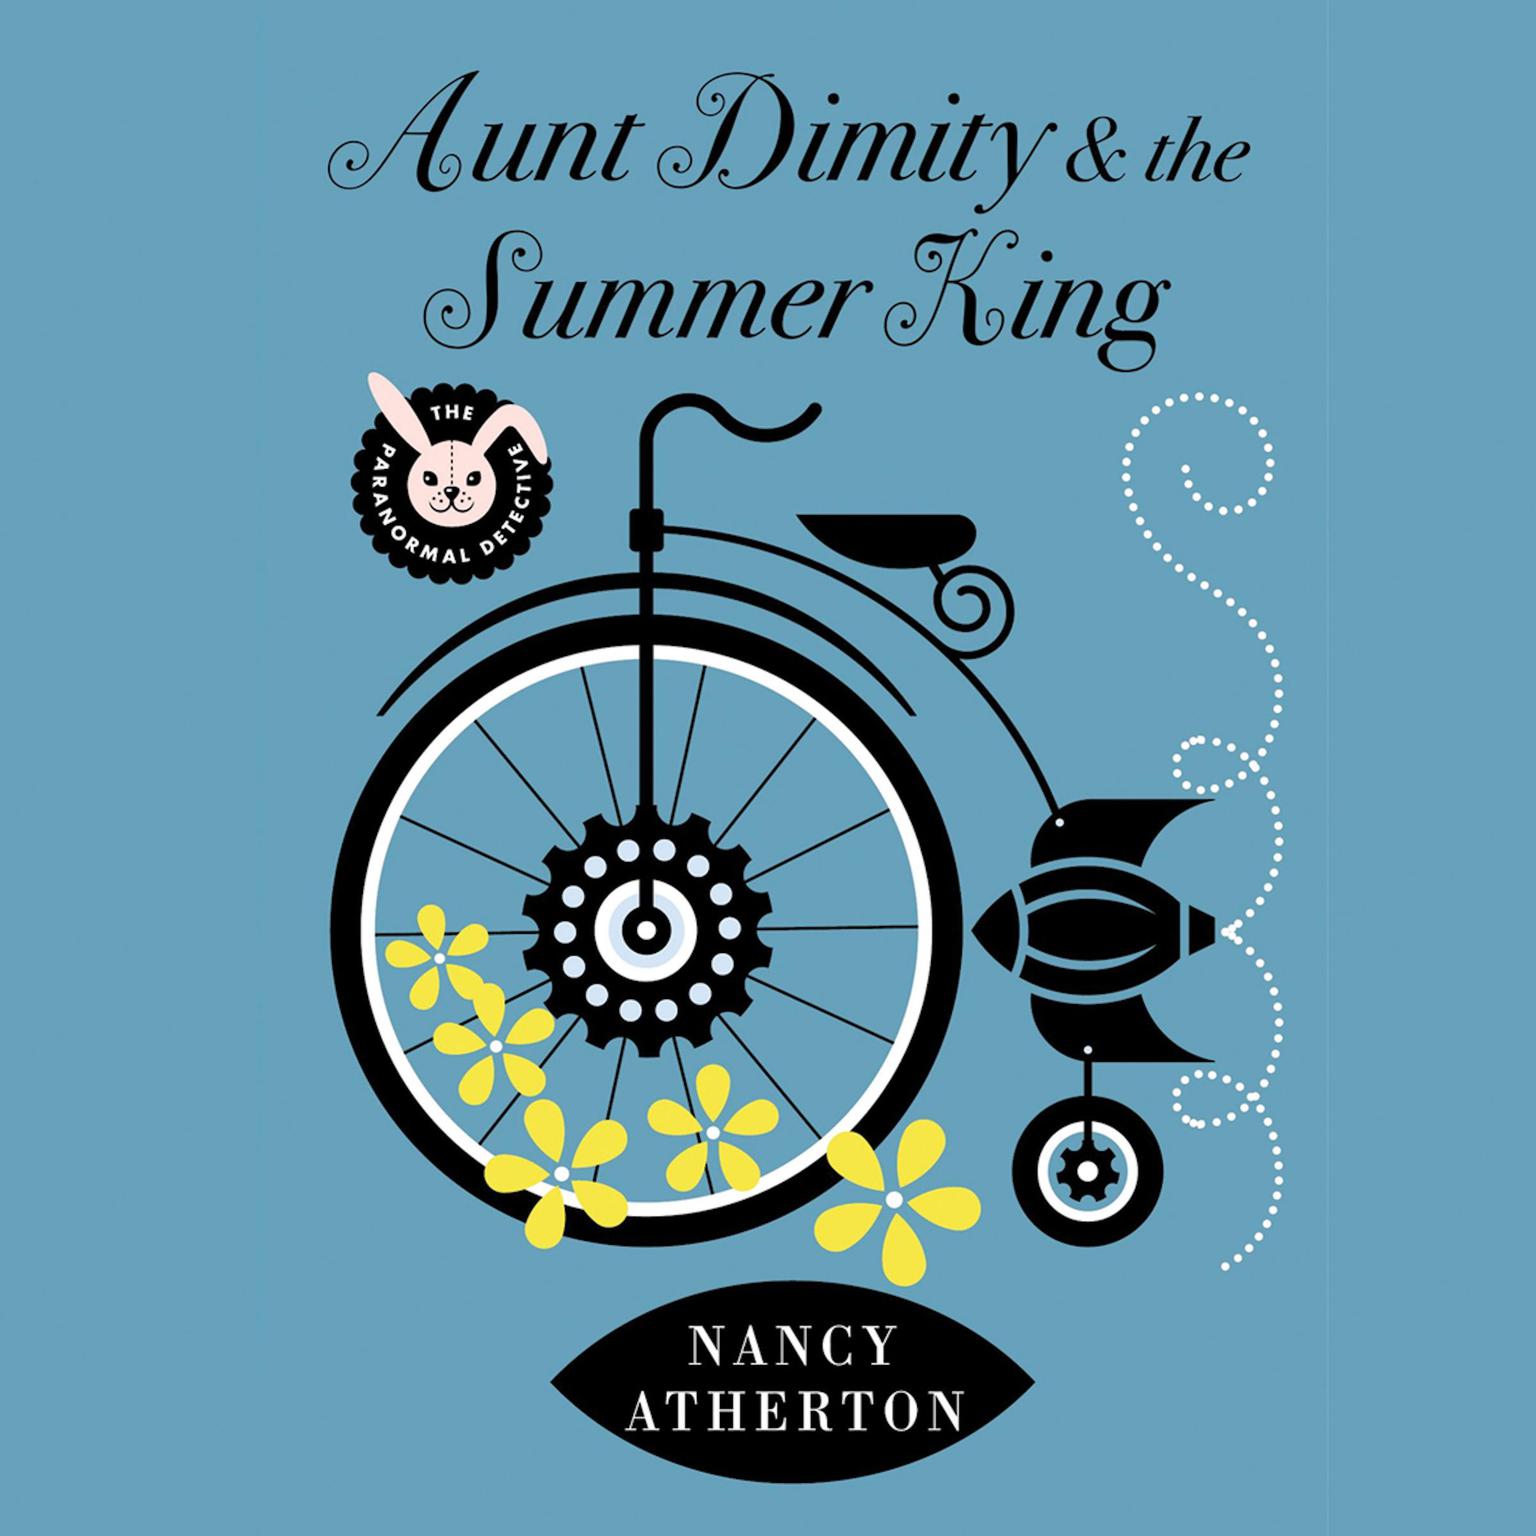 Aunt Dimity and the Summer King Audiobook, by Nancy Atherton